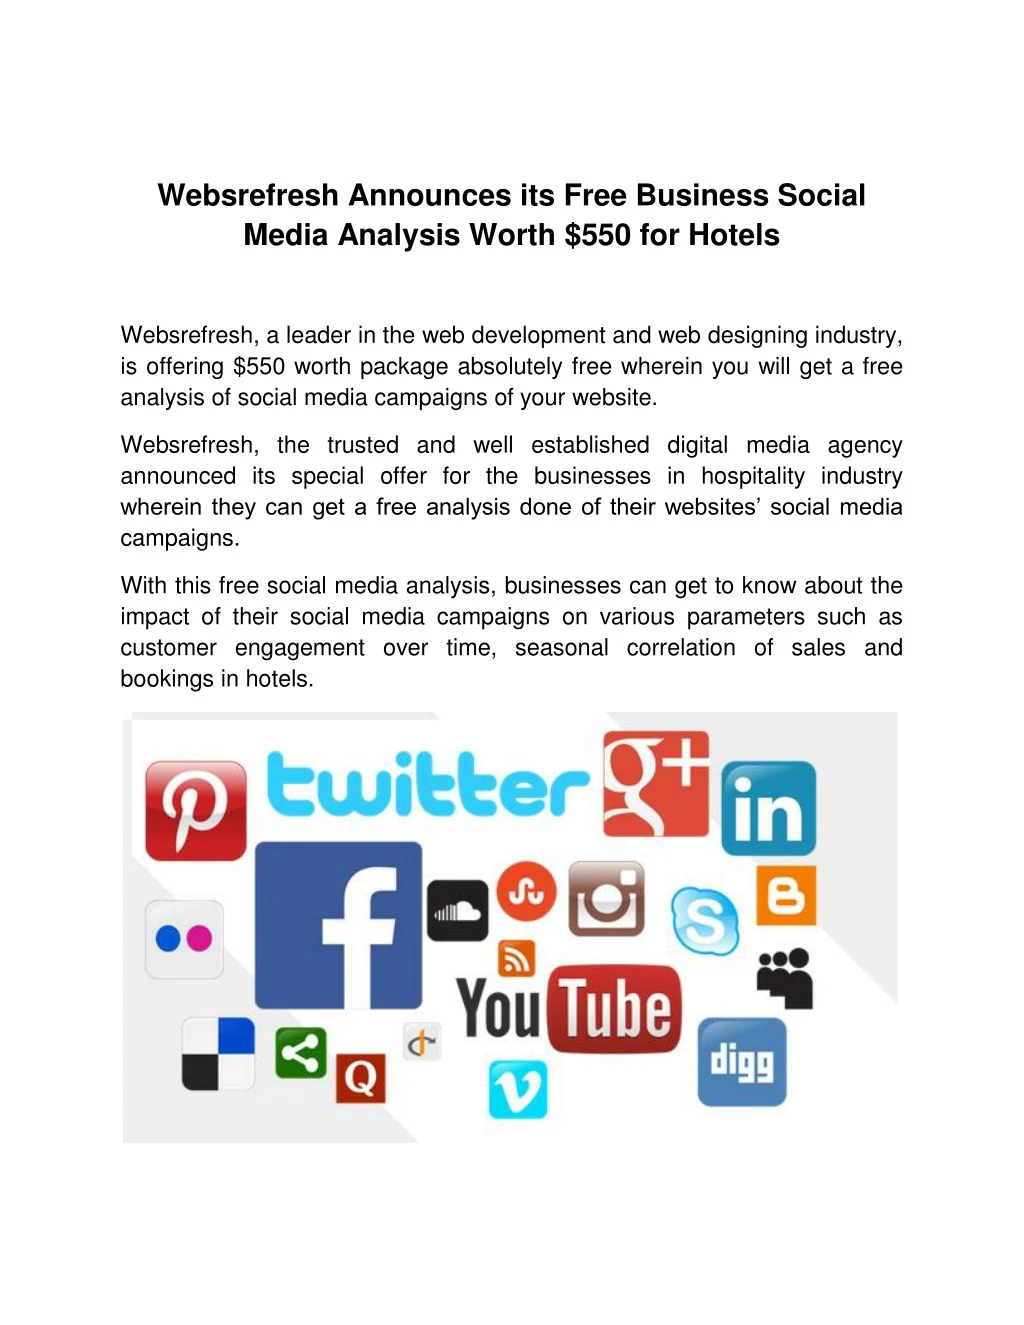 websrefresh announces its free business social